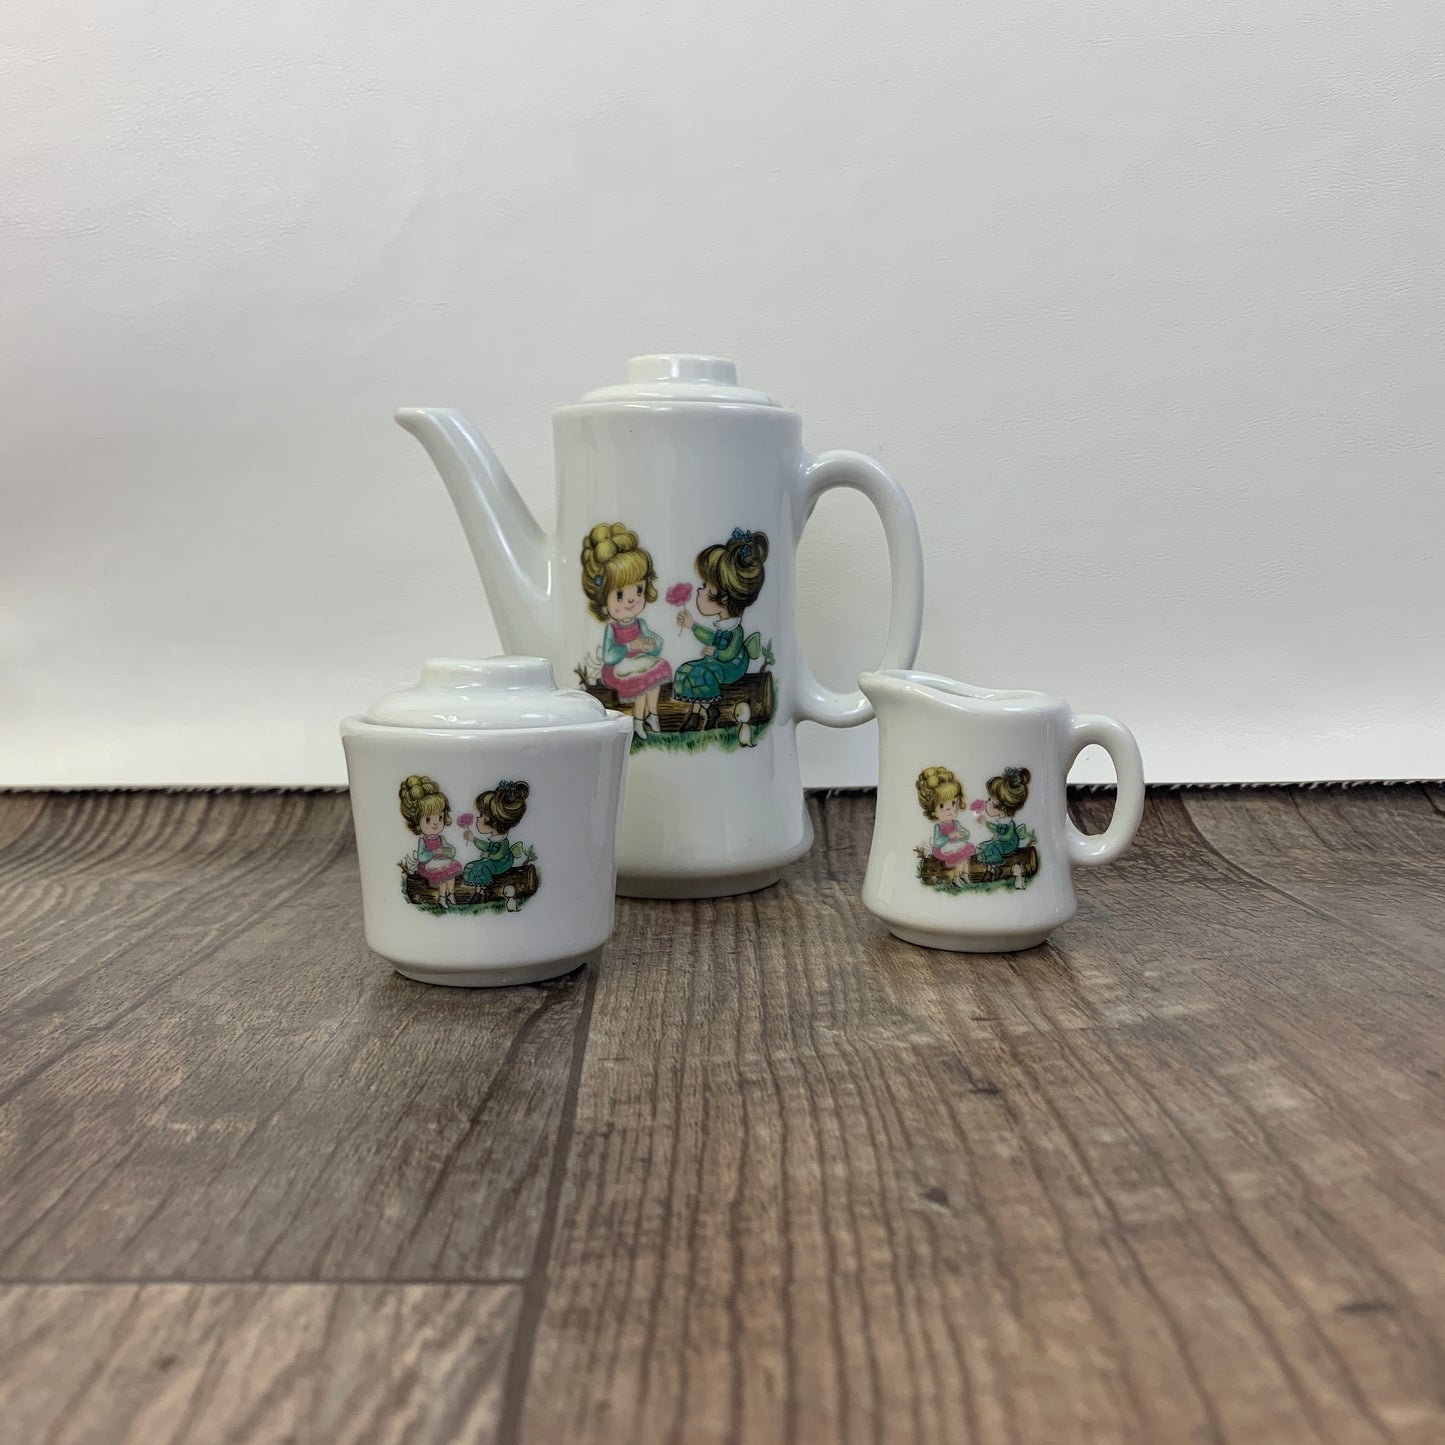 Child Size Teapot and Cream and Sugar with Two Little Girls, Mini Coffee Pot with Decal Small Ceramic Teapot Made in Japan